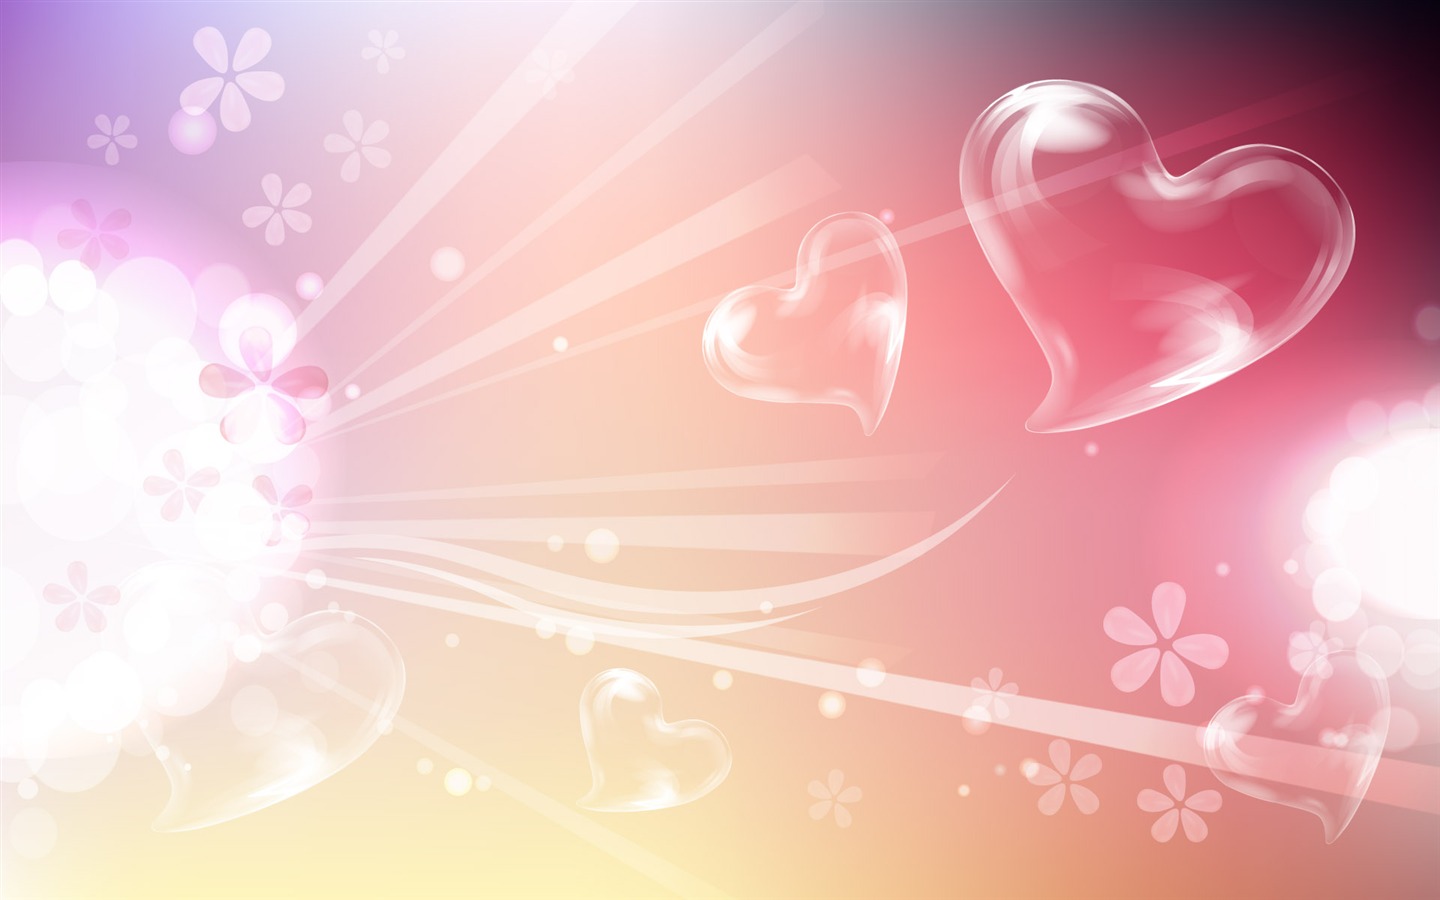 Valentine's Day Love Theme Wallpapers (2) #3 - 1440x900